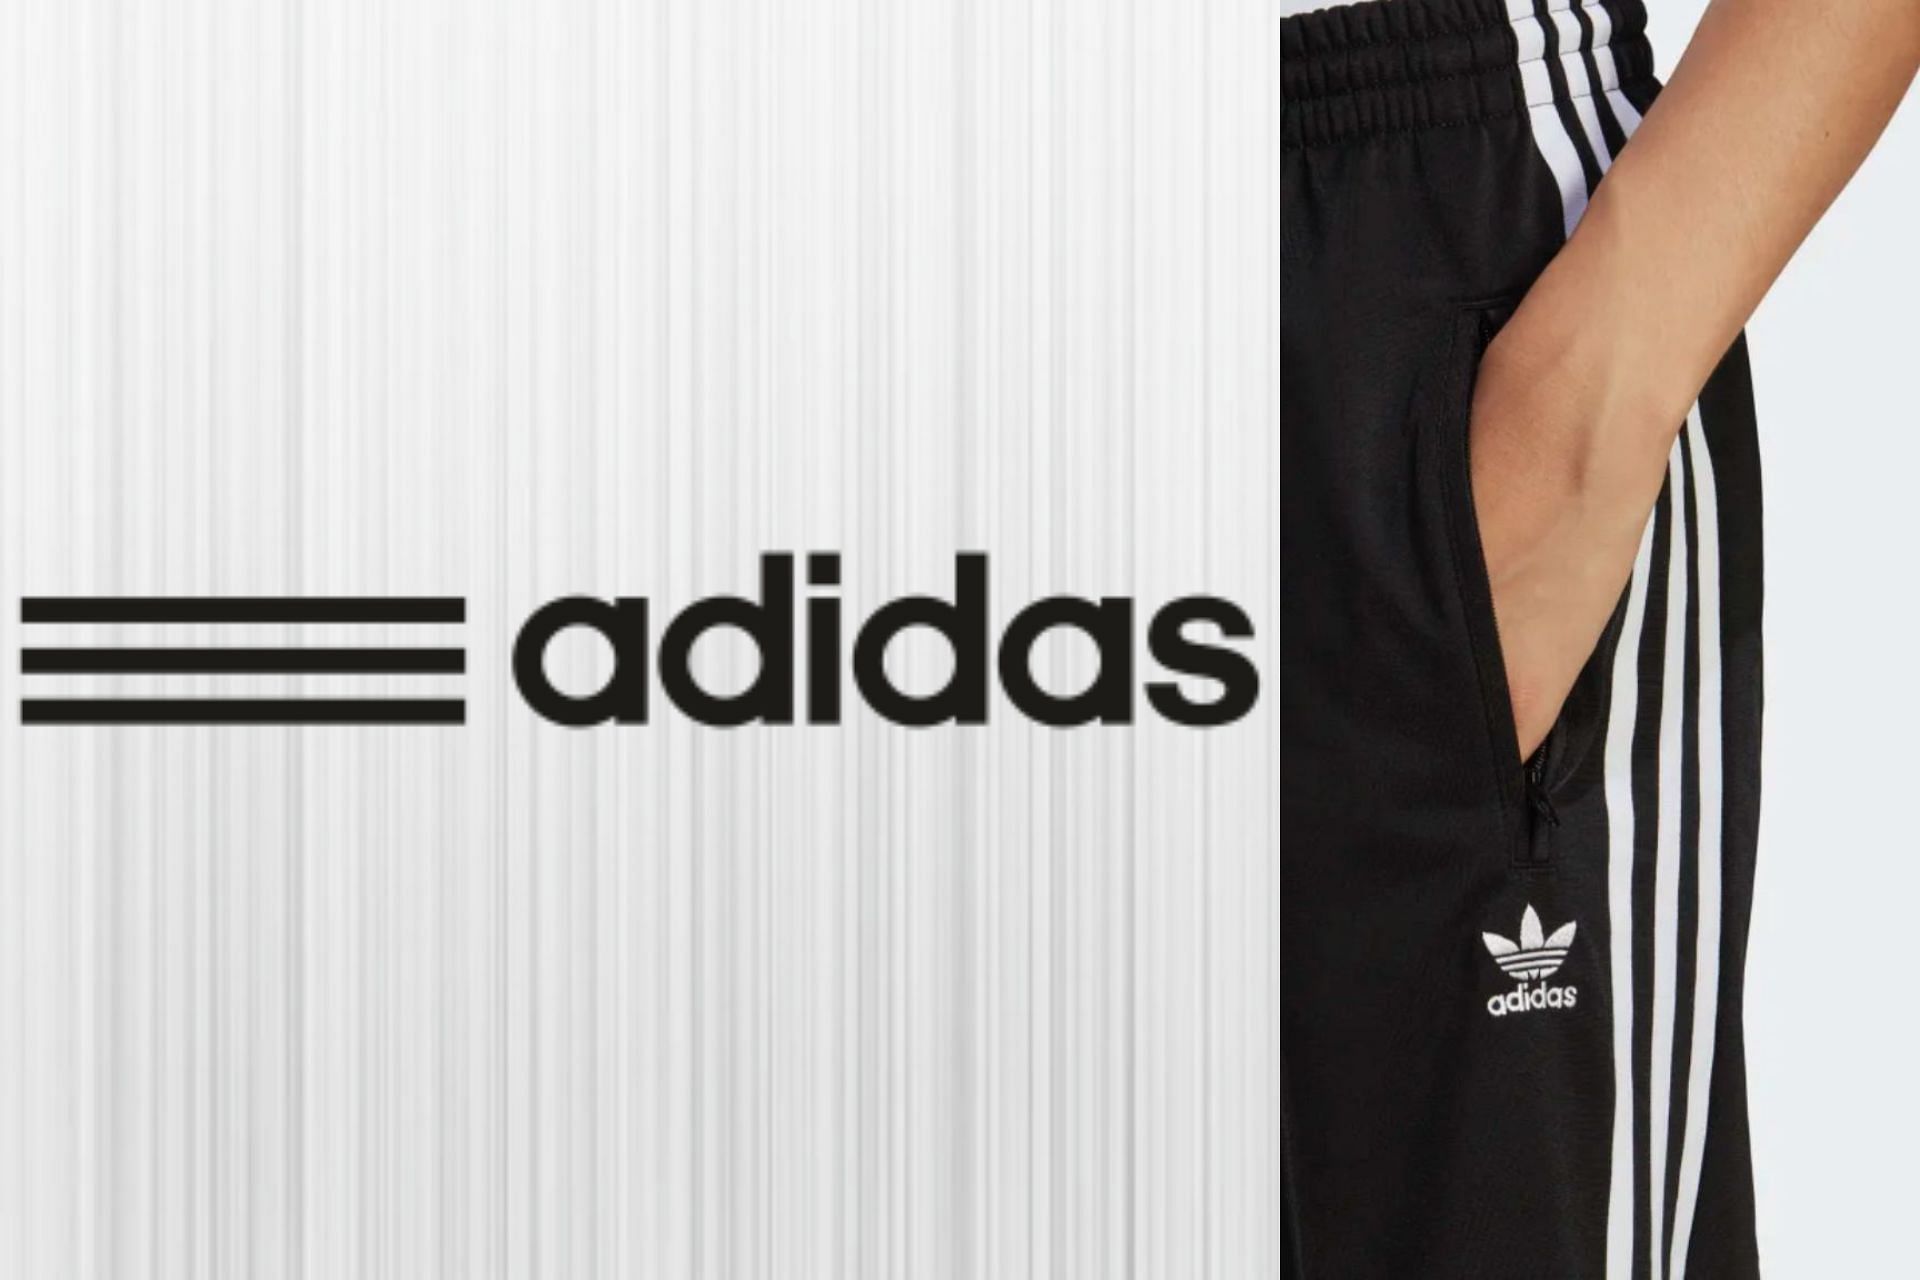 These parallel lines are the signature style of the brand&#039;s clothing and footwear items (Image via Adidas)